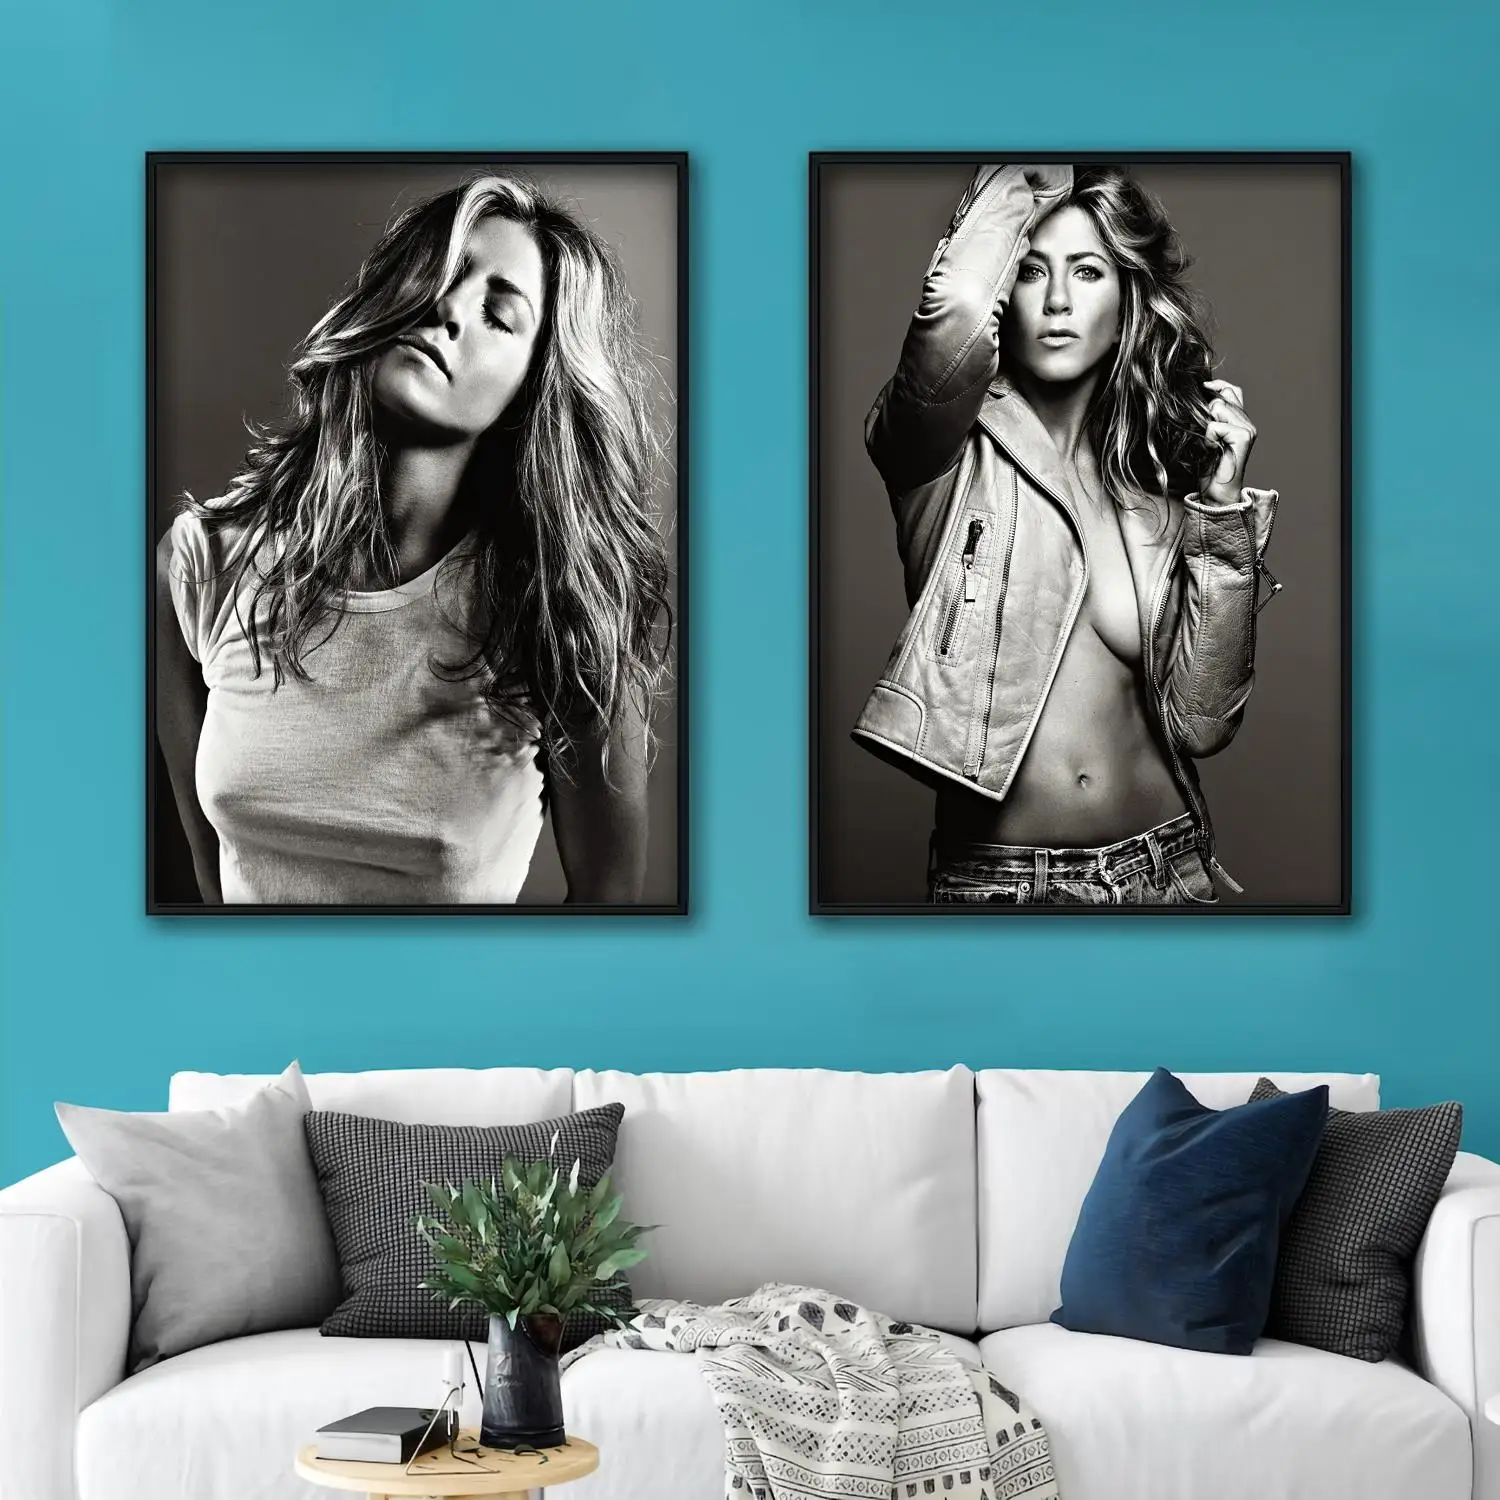 

Jennifer aniston Decorative Canvas Posters Room Bar Cafe Decor Gift Print Art Wall Paintings